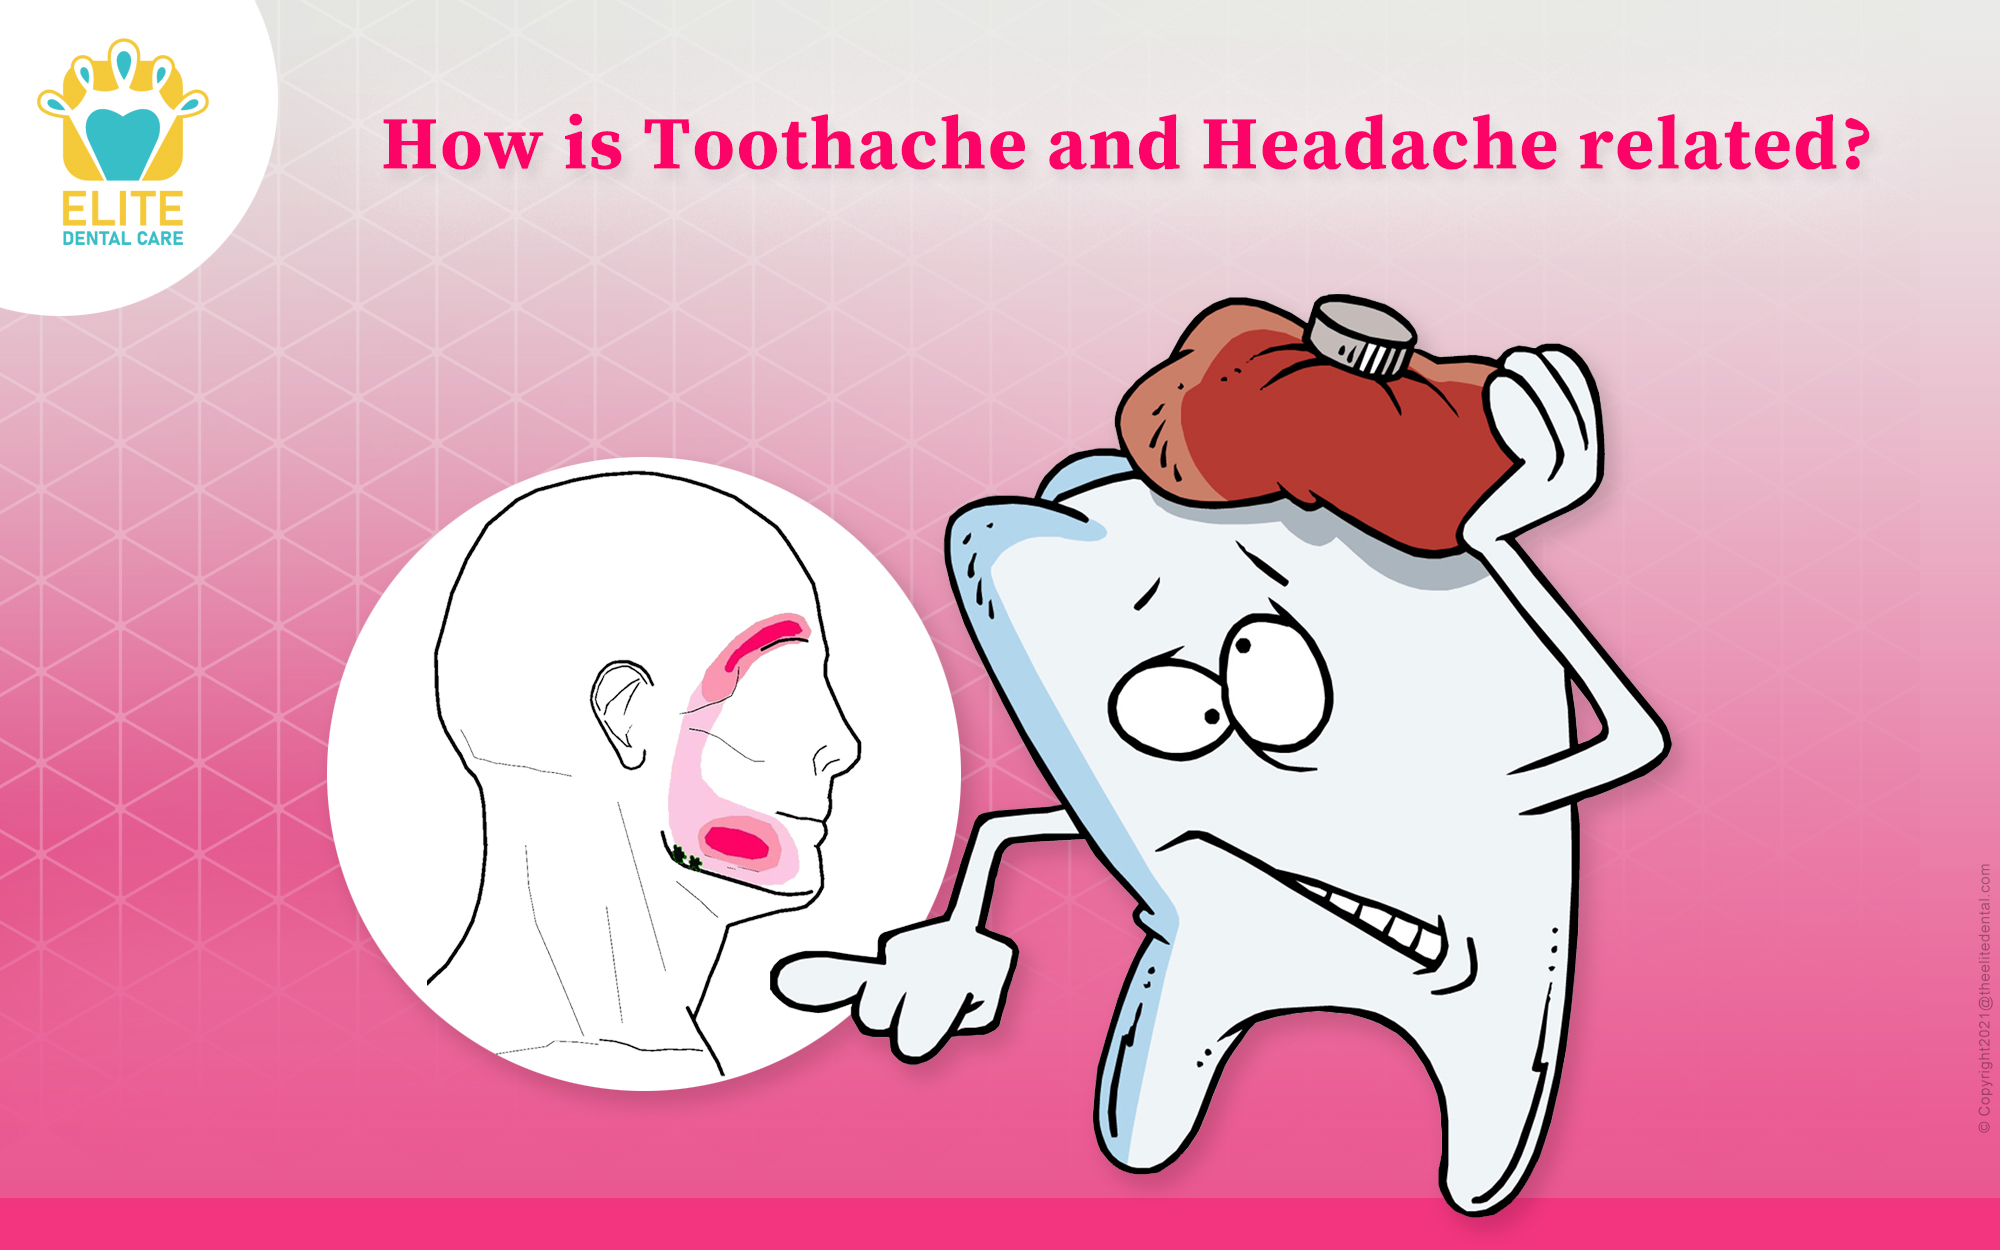 HOW IS TOOTHACHE RELATED TO YOUR HEADACHE